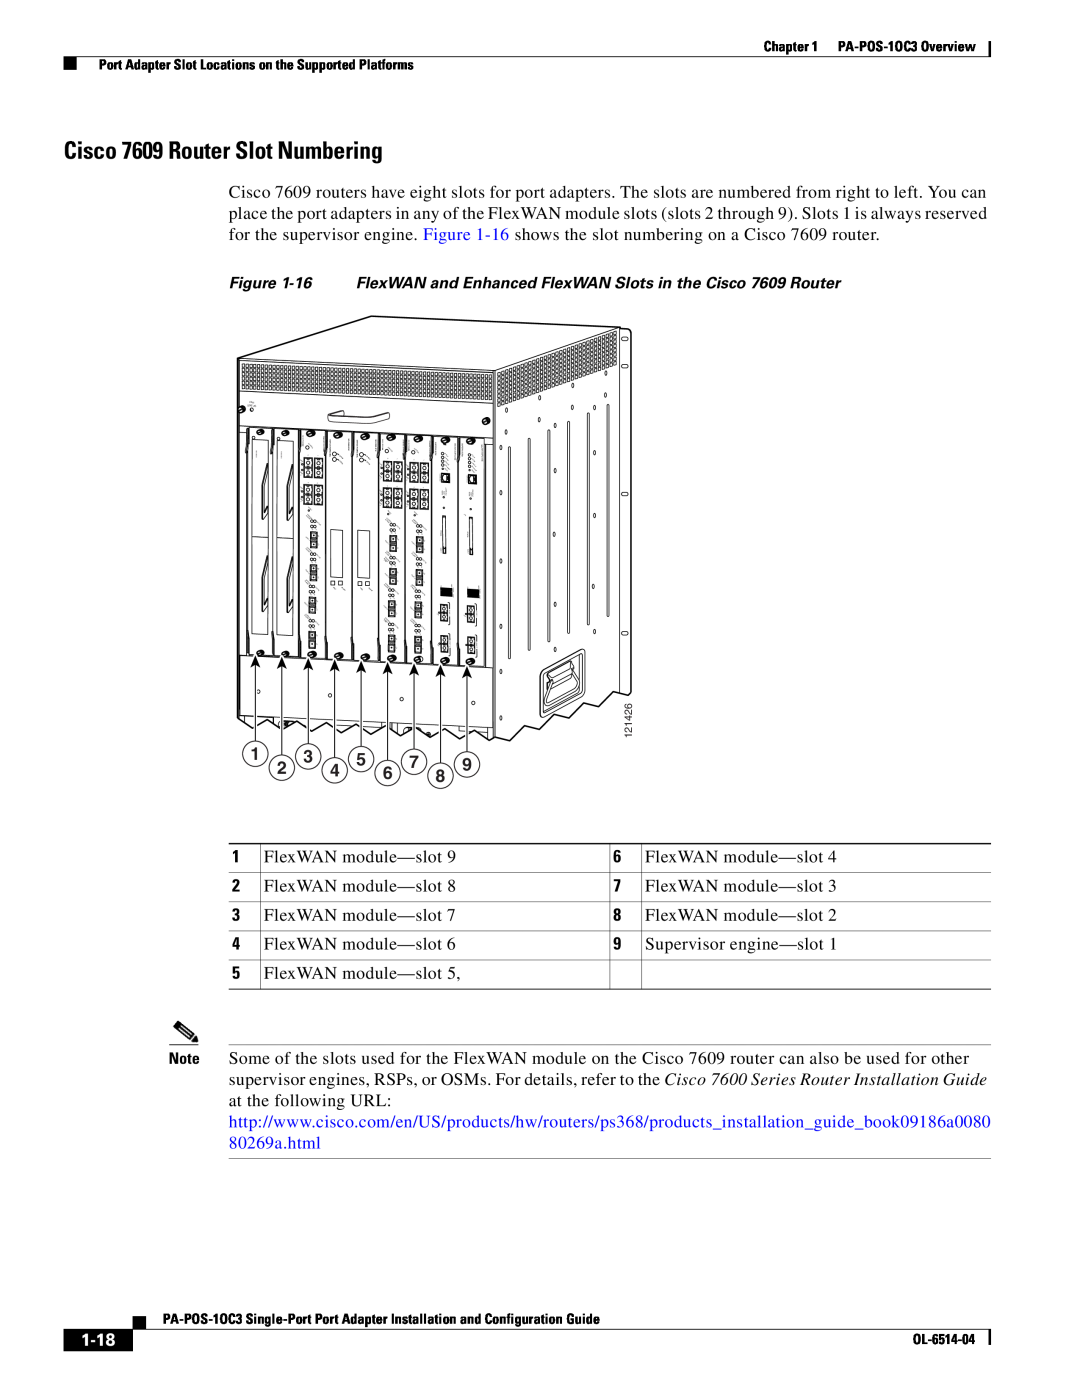 Cisco Systems PA-POS-2OC3, PA-POS-1OC3 manual Cisco 7609 Router Slot Numbering, 1-18, Fan Status 